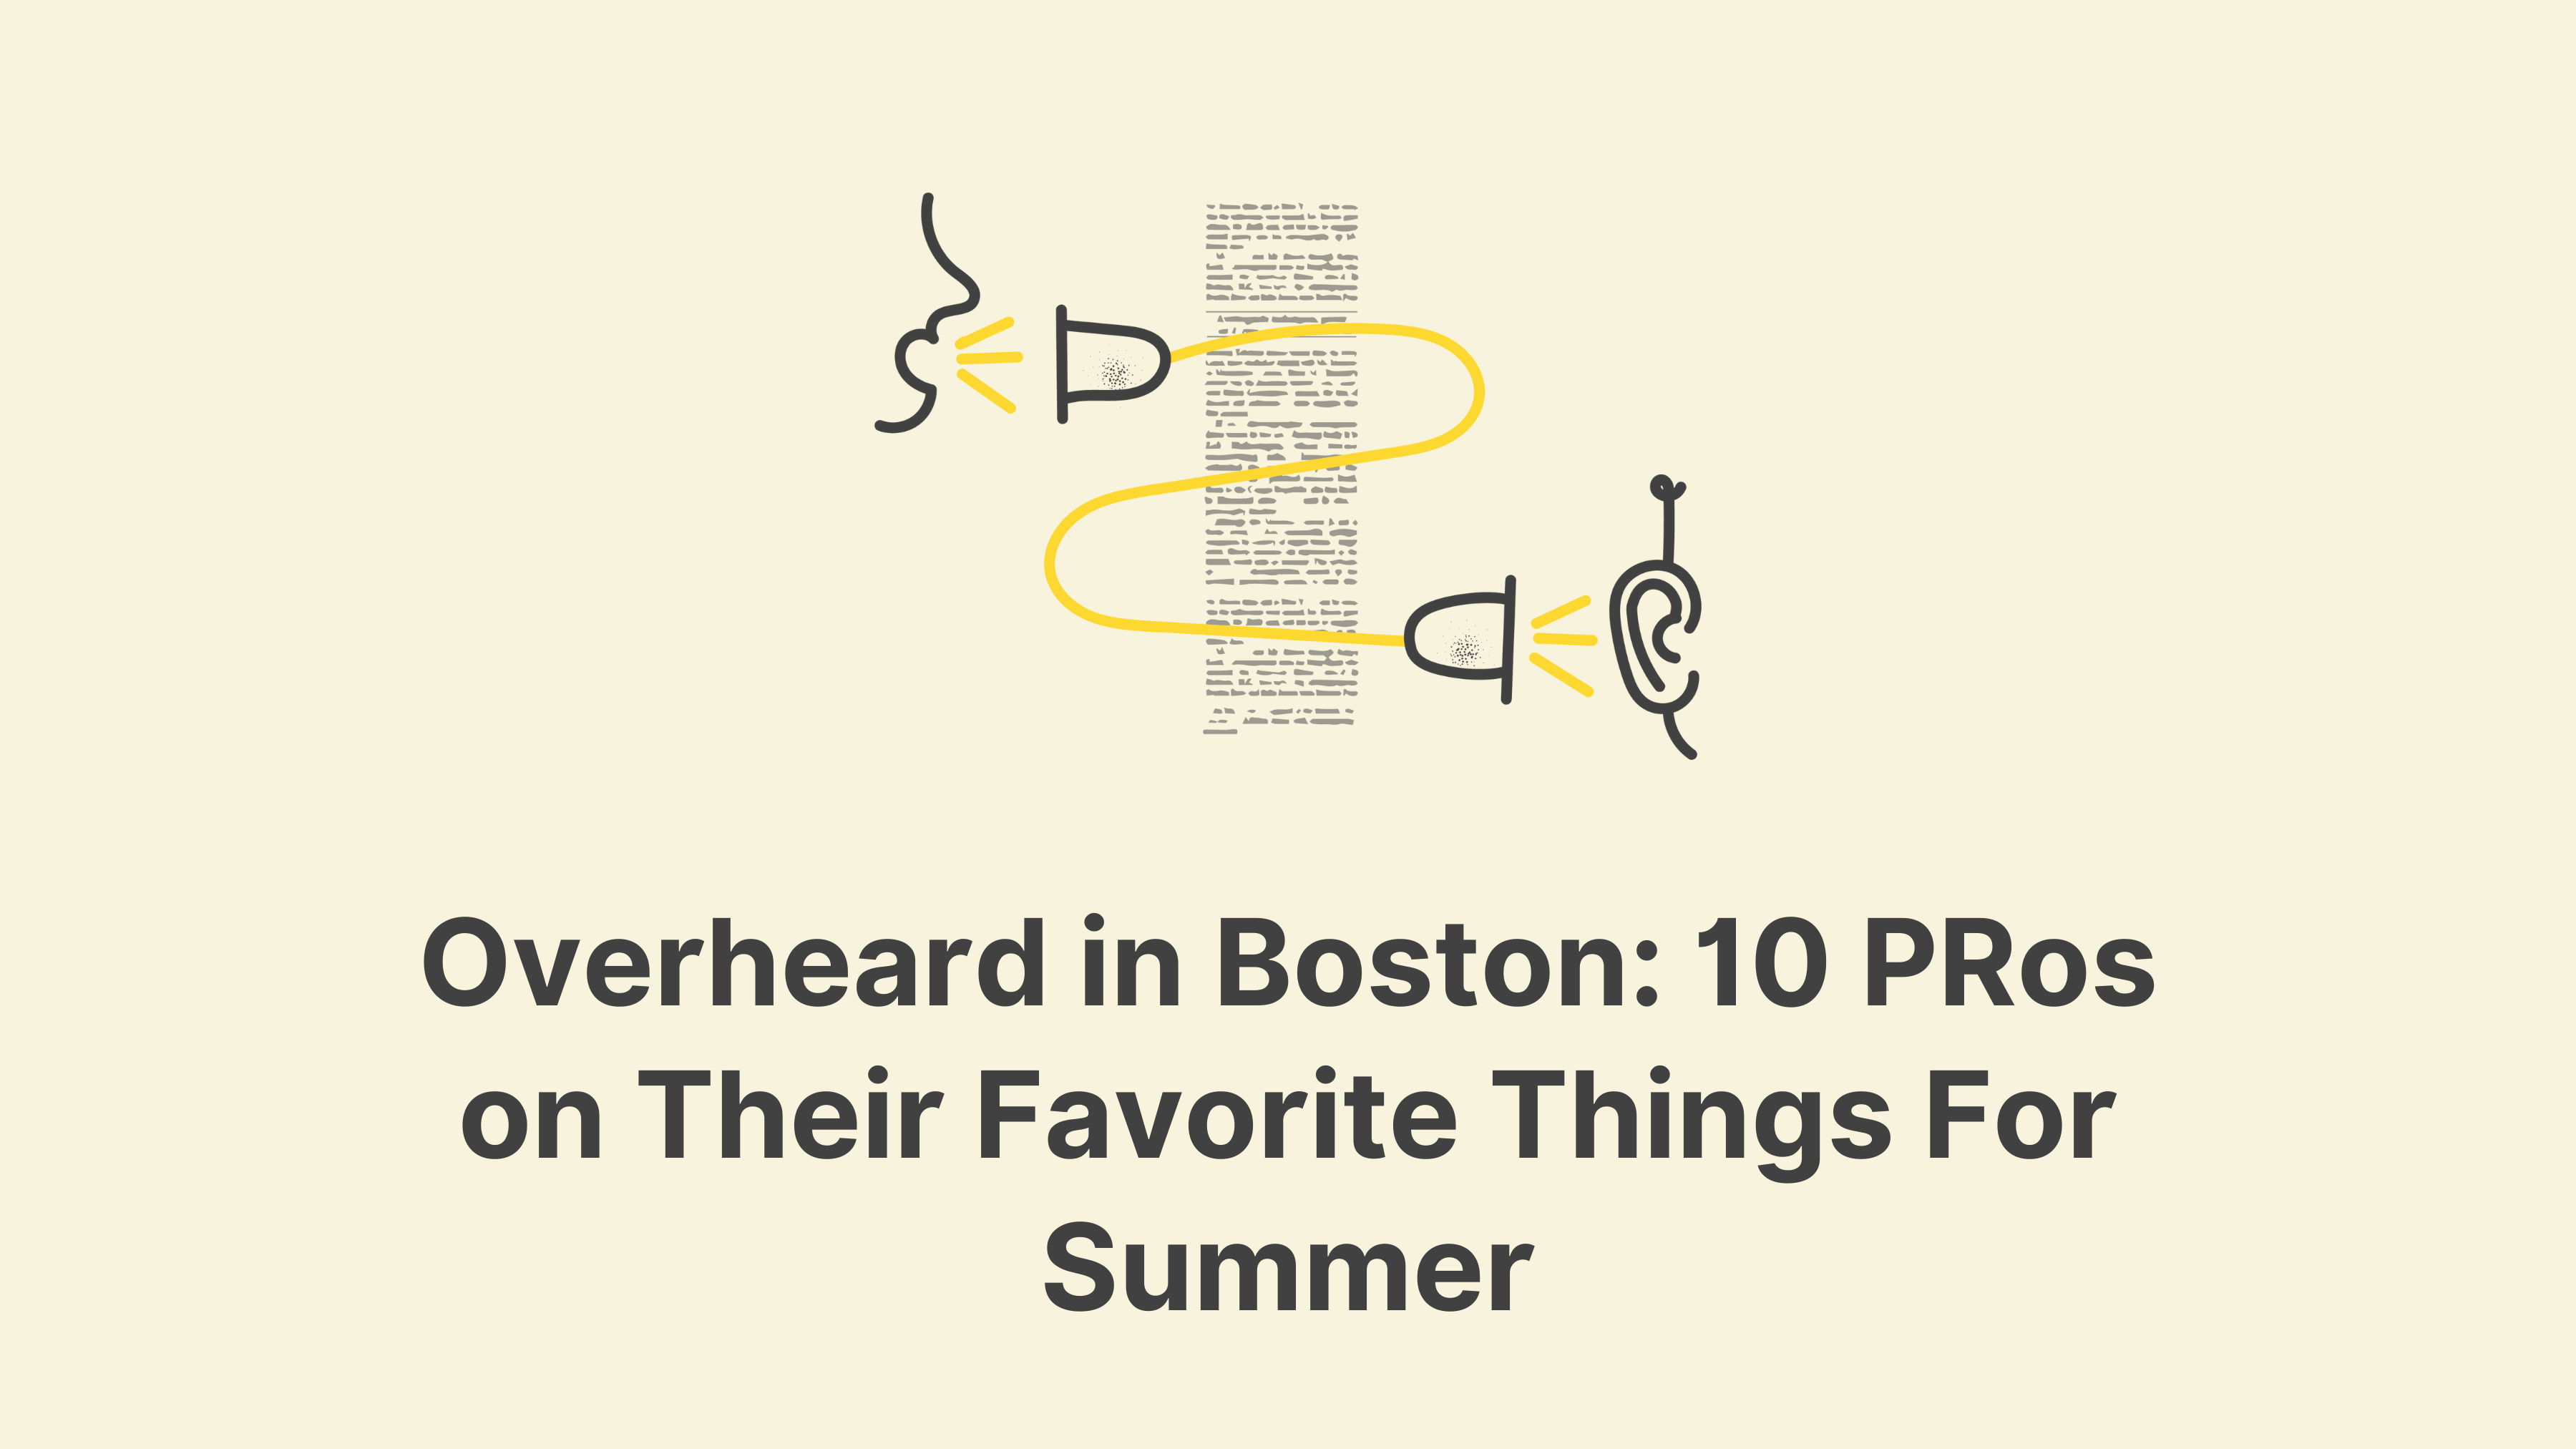 Overheard in Boston: 10 PRos on Their Favorite Things For Summer